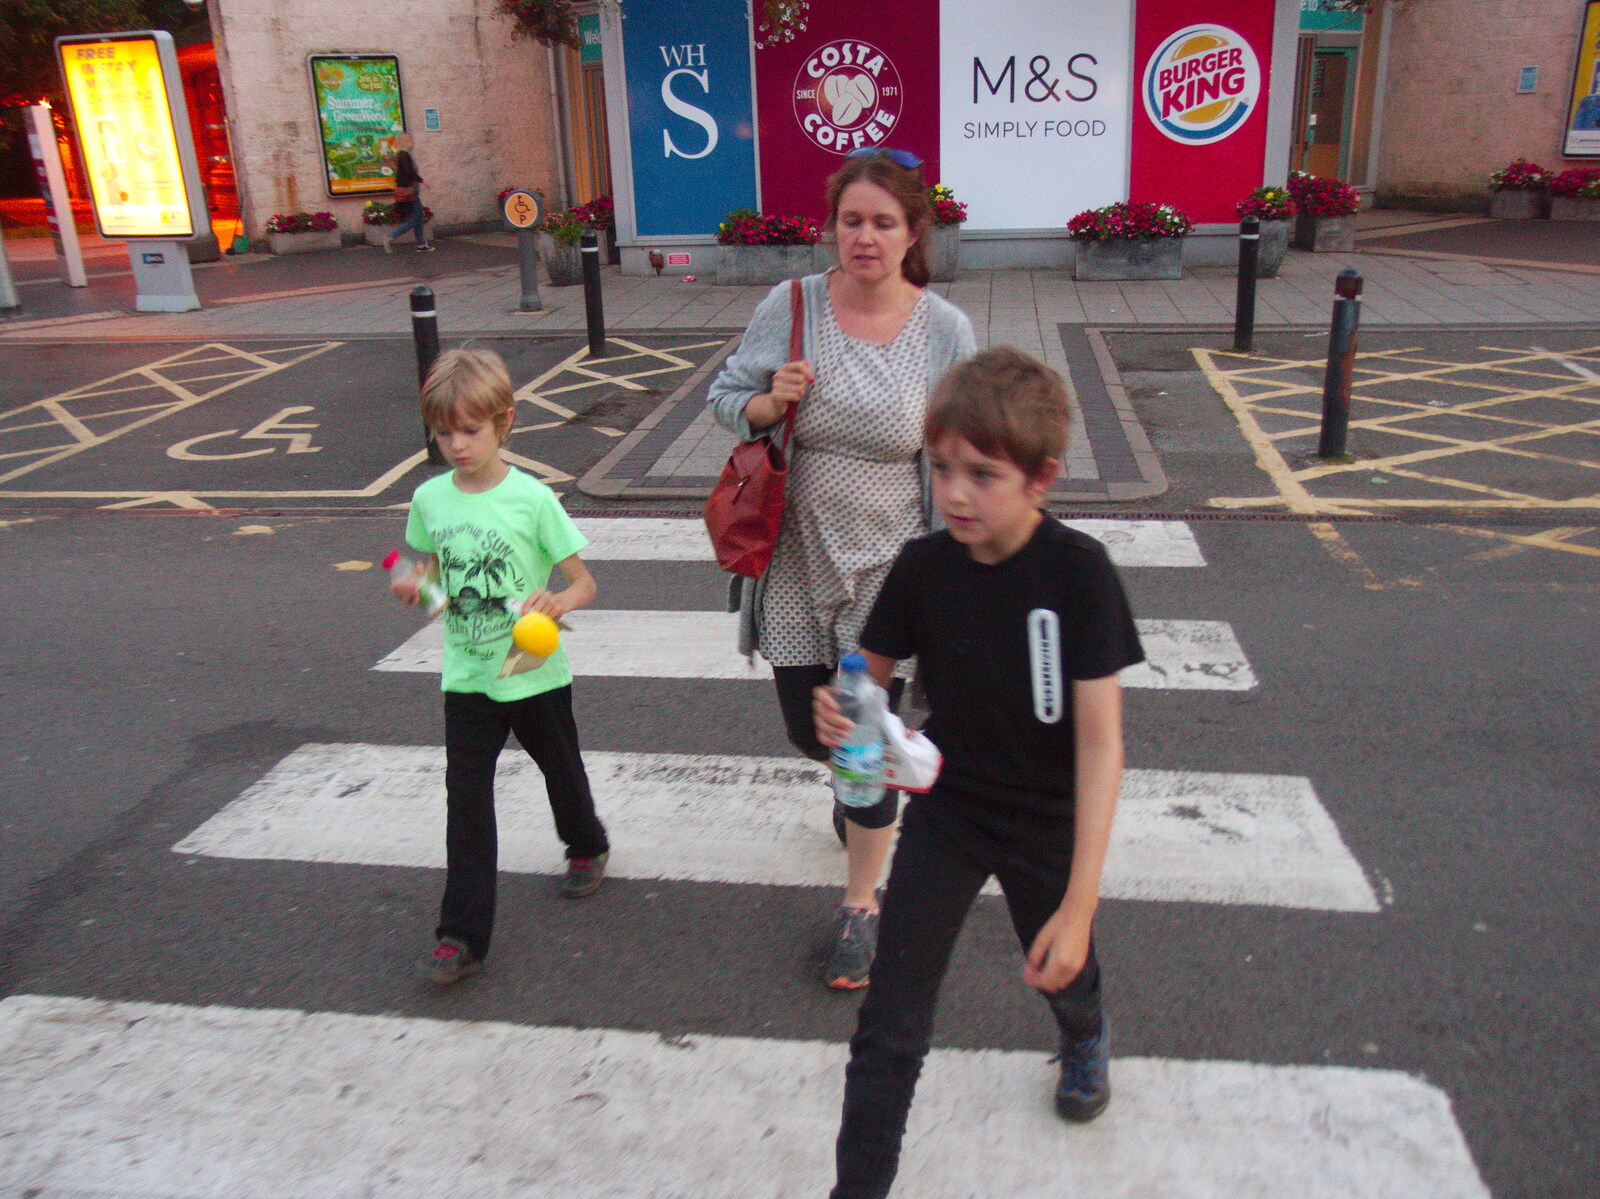 Abbey Road outside Stafford Services from The Summer Trip to Ireland, Monkstown, Co. Dublin, Ireland - 9th August 2019